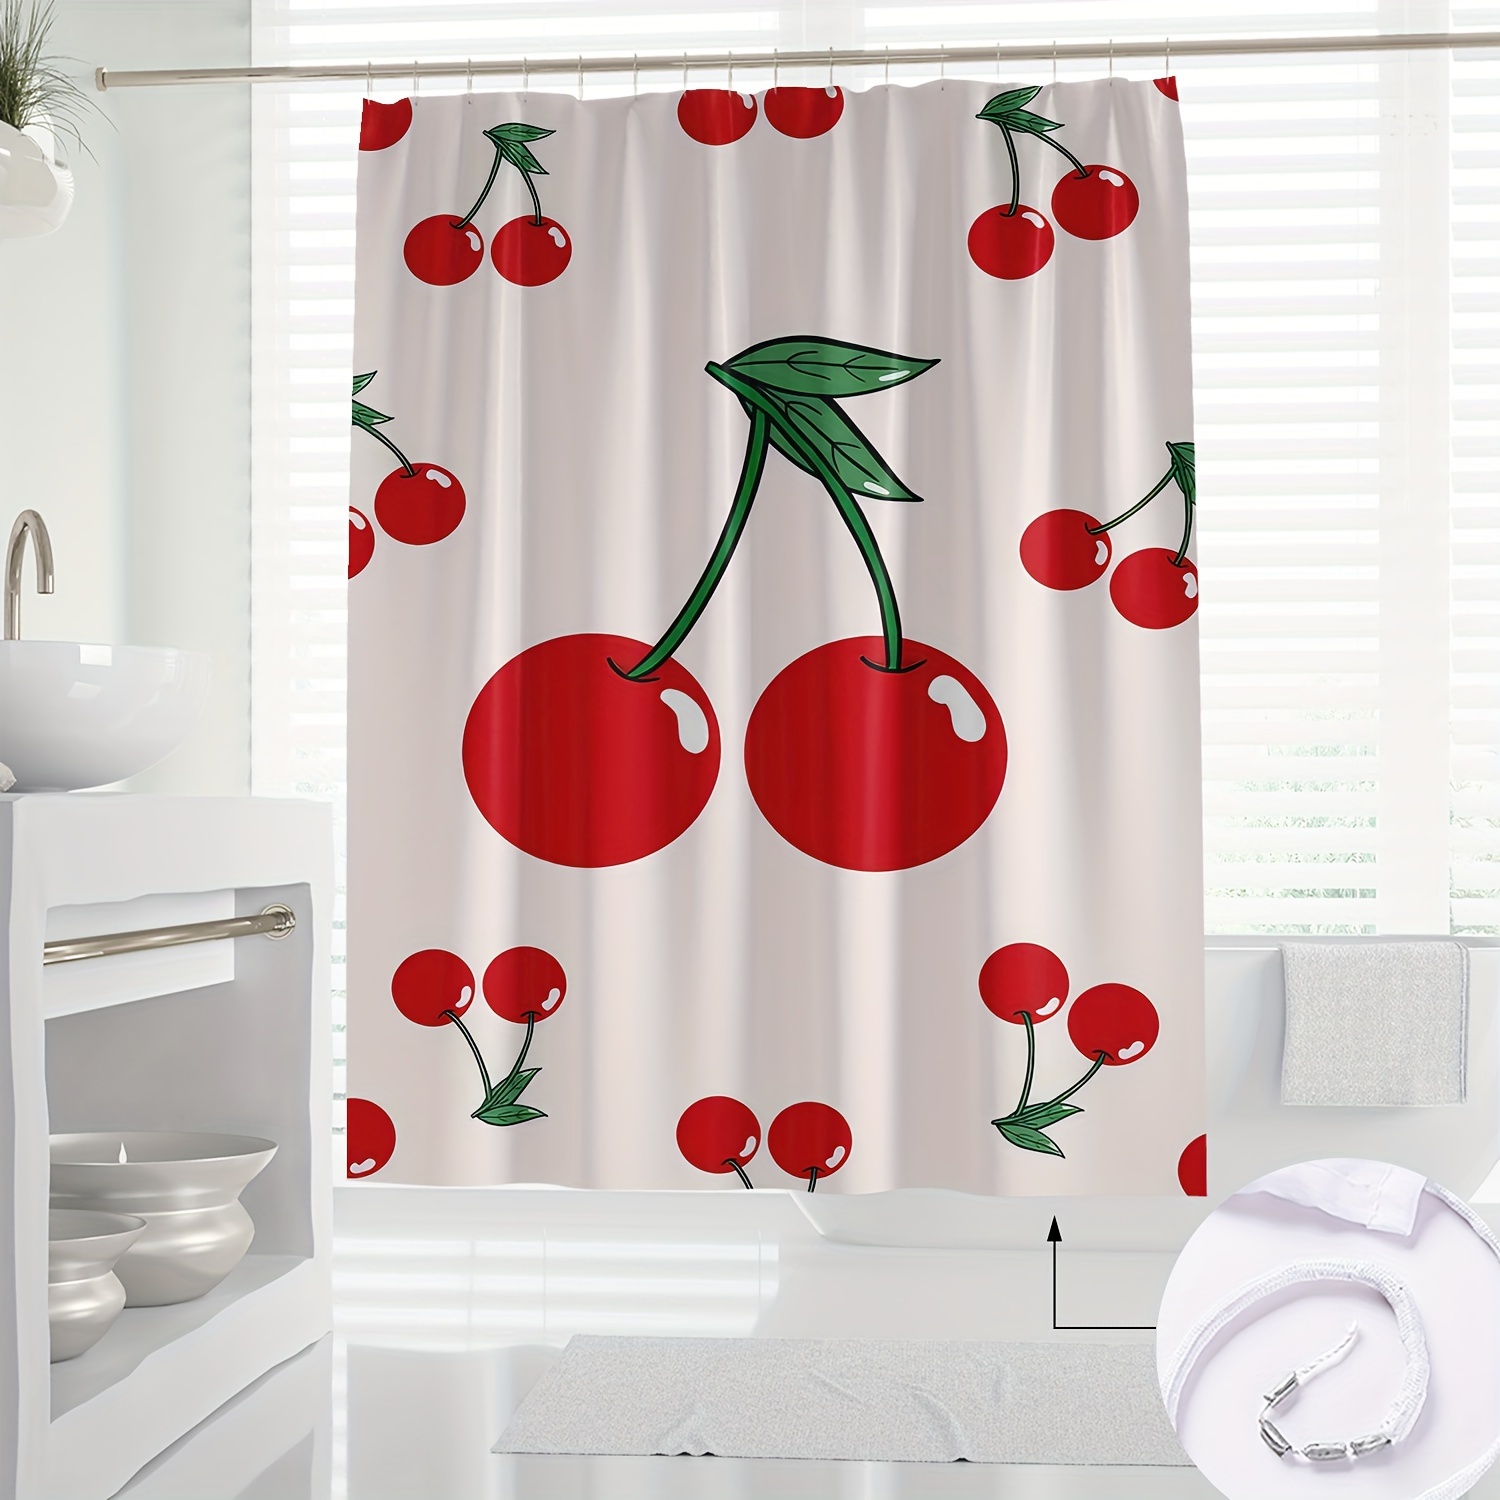 

Hand-painted Cherry Design Digital Print Shower Curtain, 1pc Water-resistant Polyester Bathroom Decor With Hooks, Machine Washable, Novelty Arts Theme Knit Weave, Partially Lined - All Season